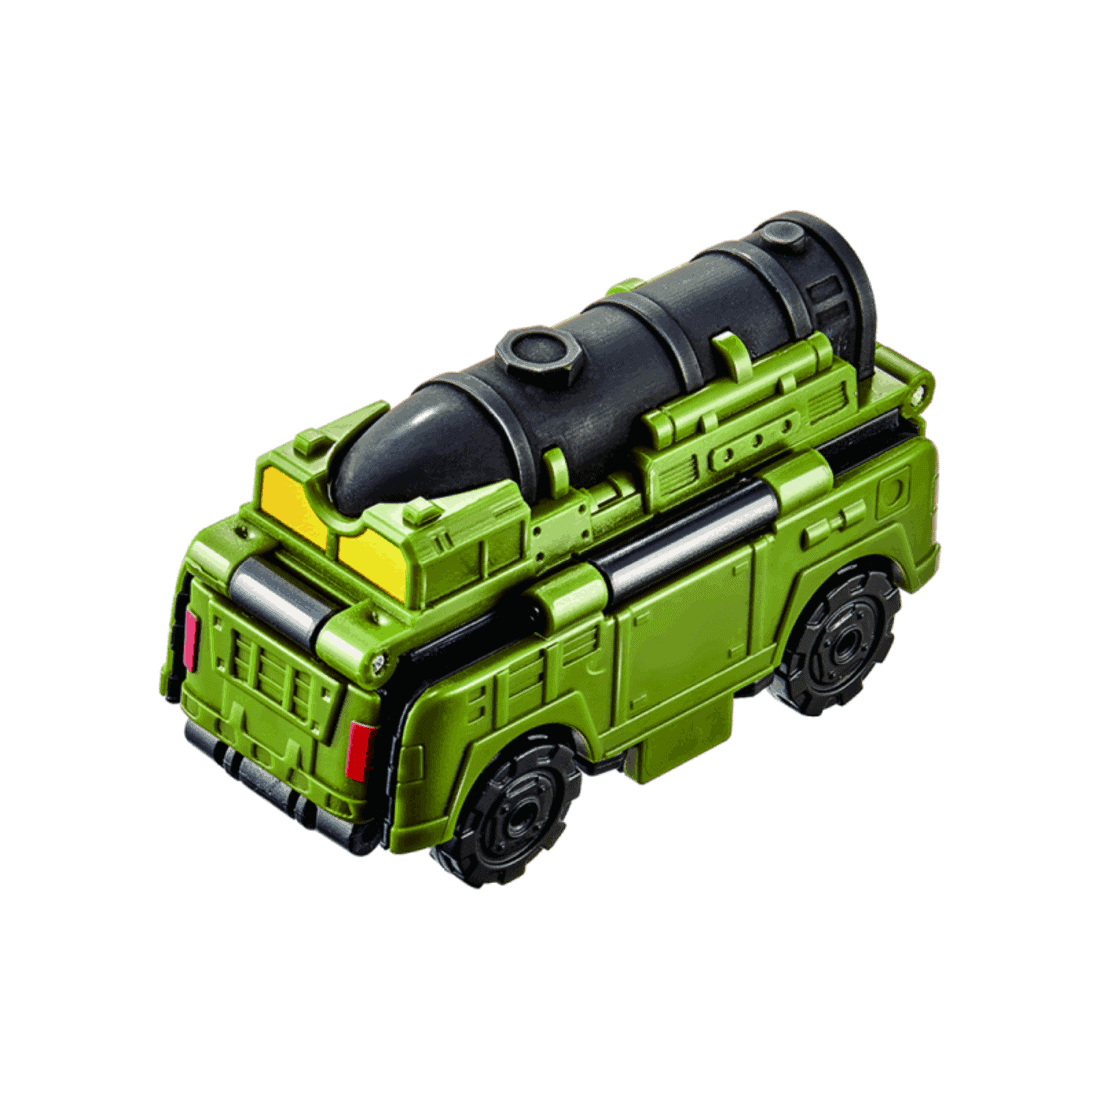 Flip Cars - 2 cars in One : Missile Carrier - Army Vehicle